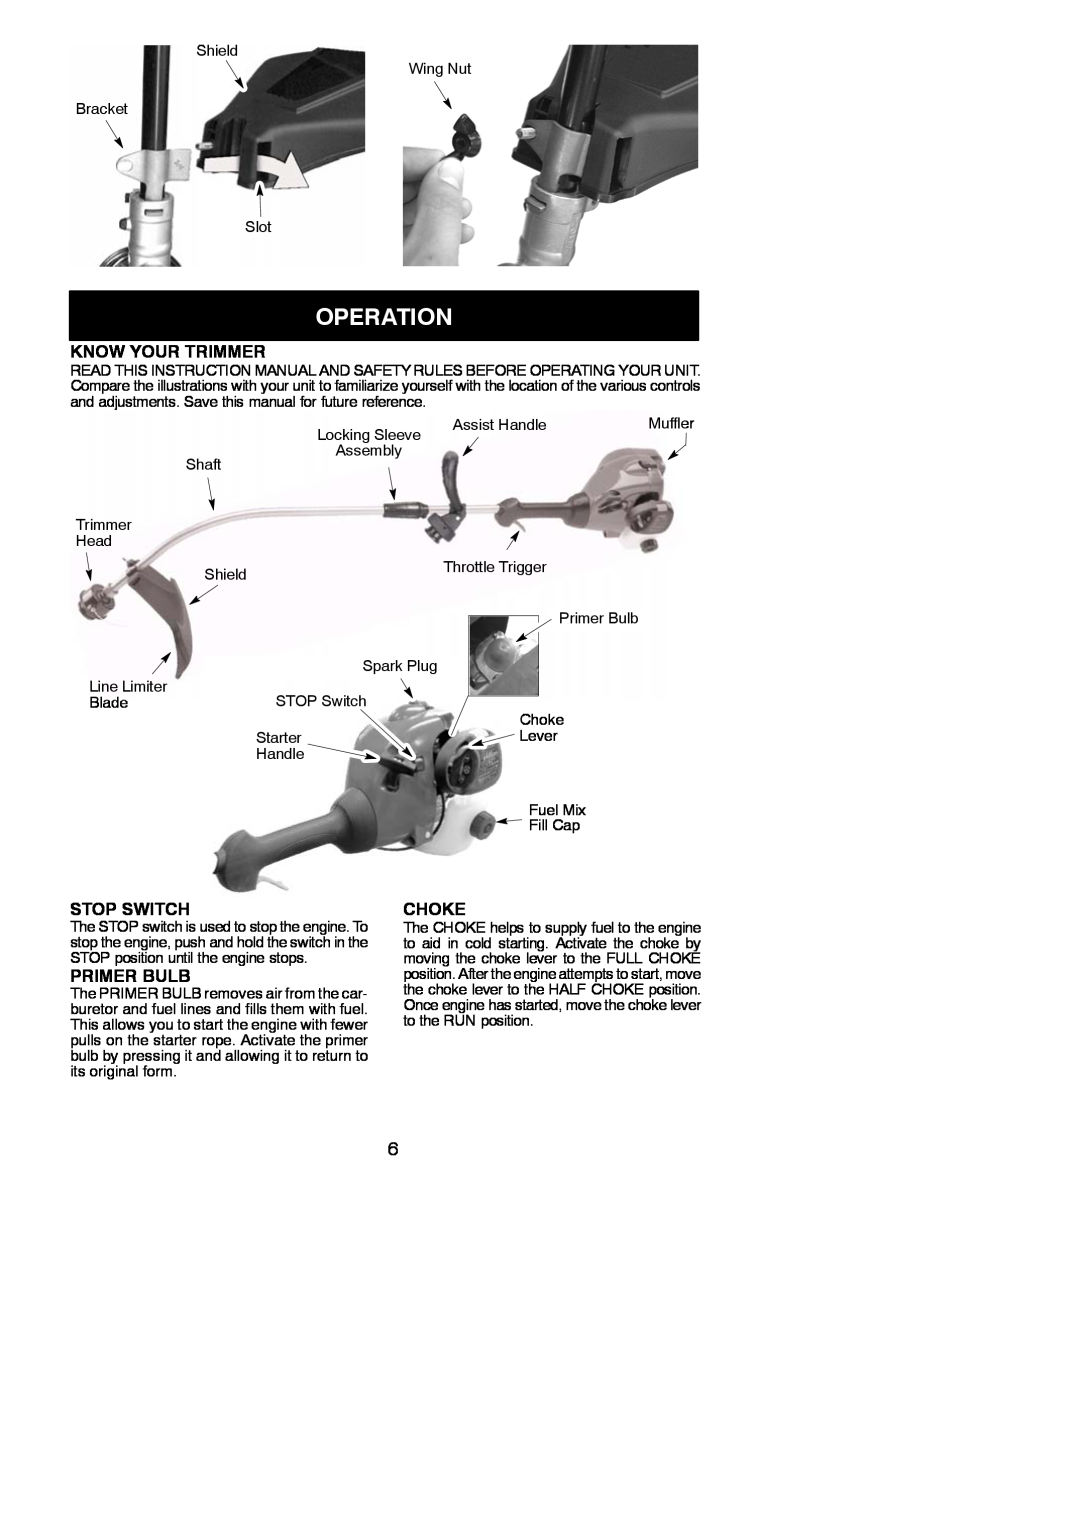 Weed Eater FX20SC, 952711941 instruction manual Operation, Know Your Trimmer, Stop Switch, Primer Bulb, Choke 